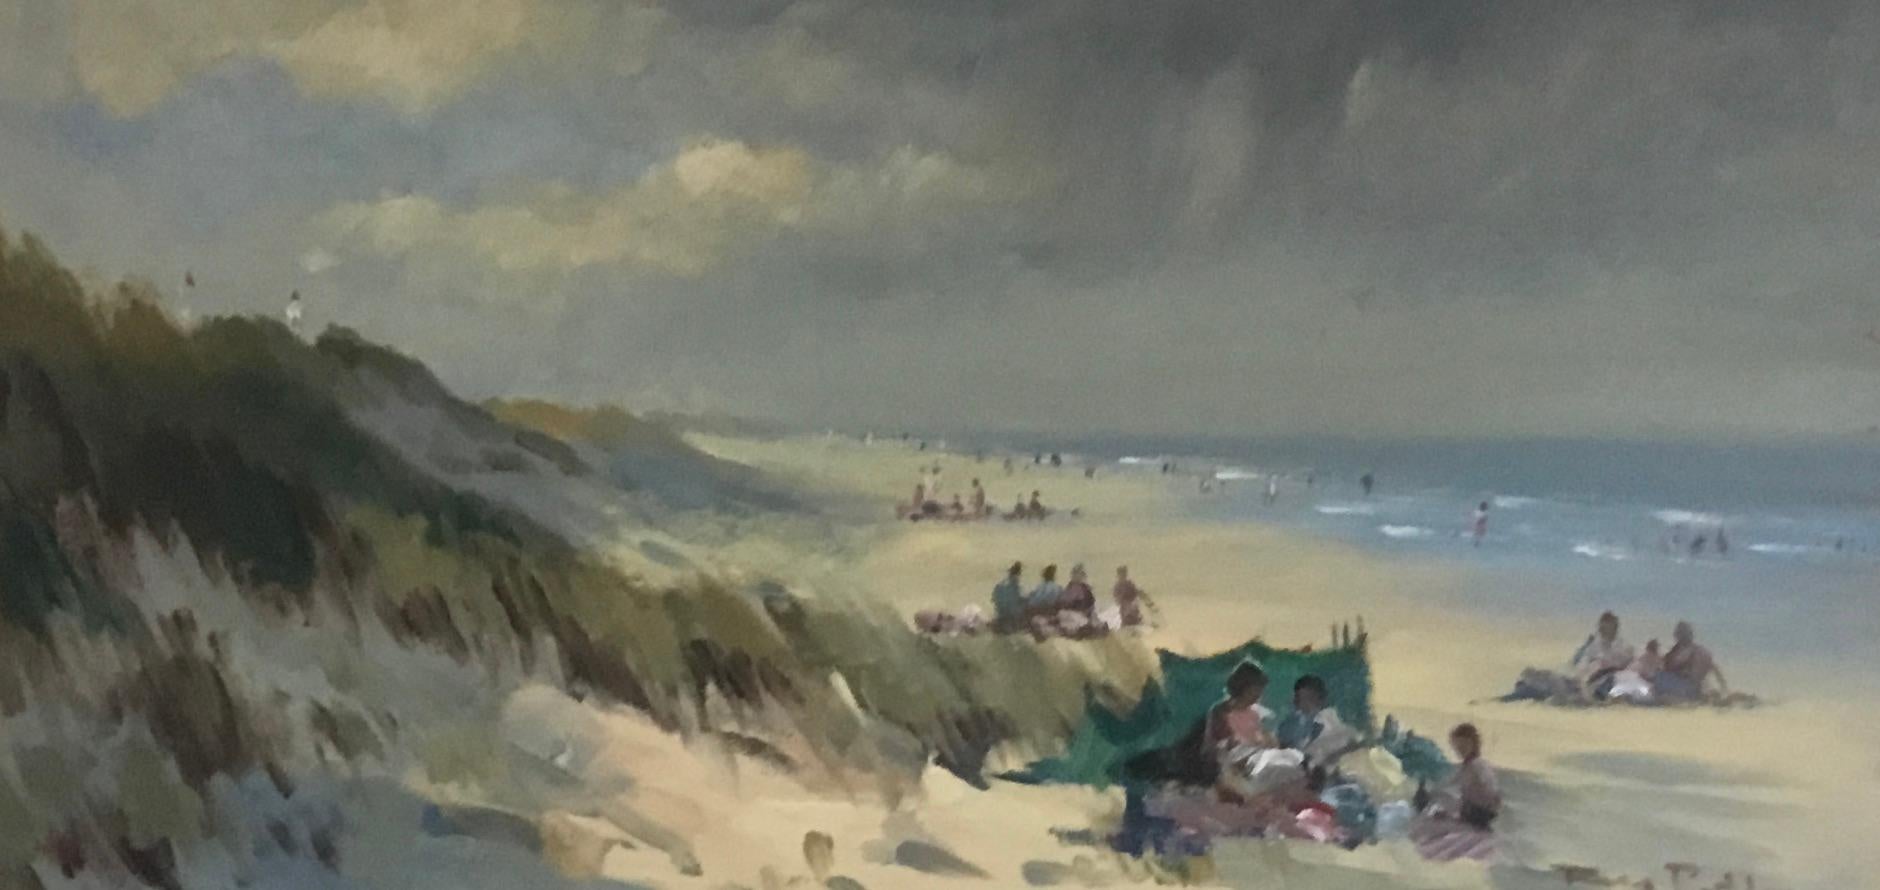 
Roy Petley

Born	3 April 1950 (
Grantham, Lincolnshire
Nationality	British
Known for	Painter
Movement	Impressionism
Roy Petley (born 3 April 1950) is a British painter.

Petley paints en plein air to depict the wide expanse of English beaches and